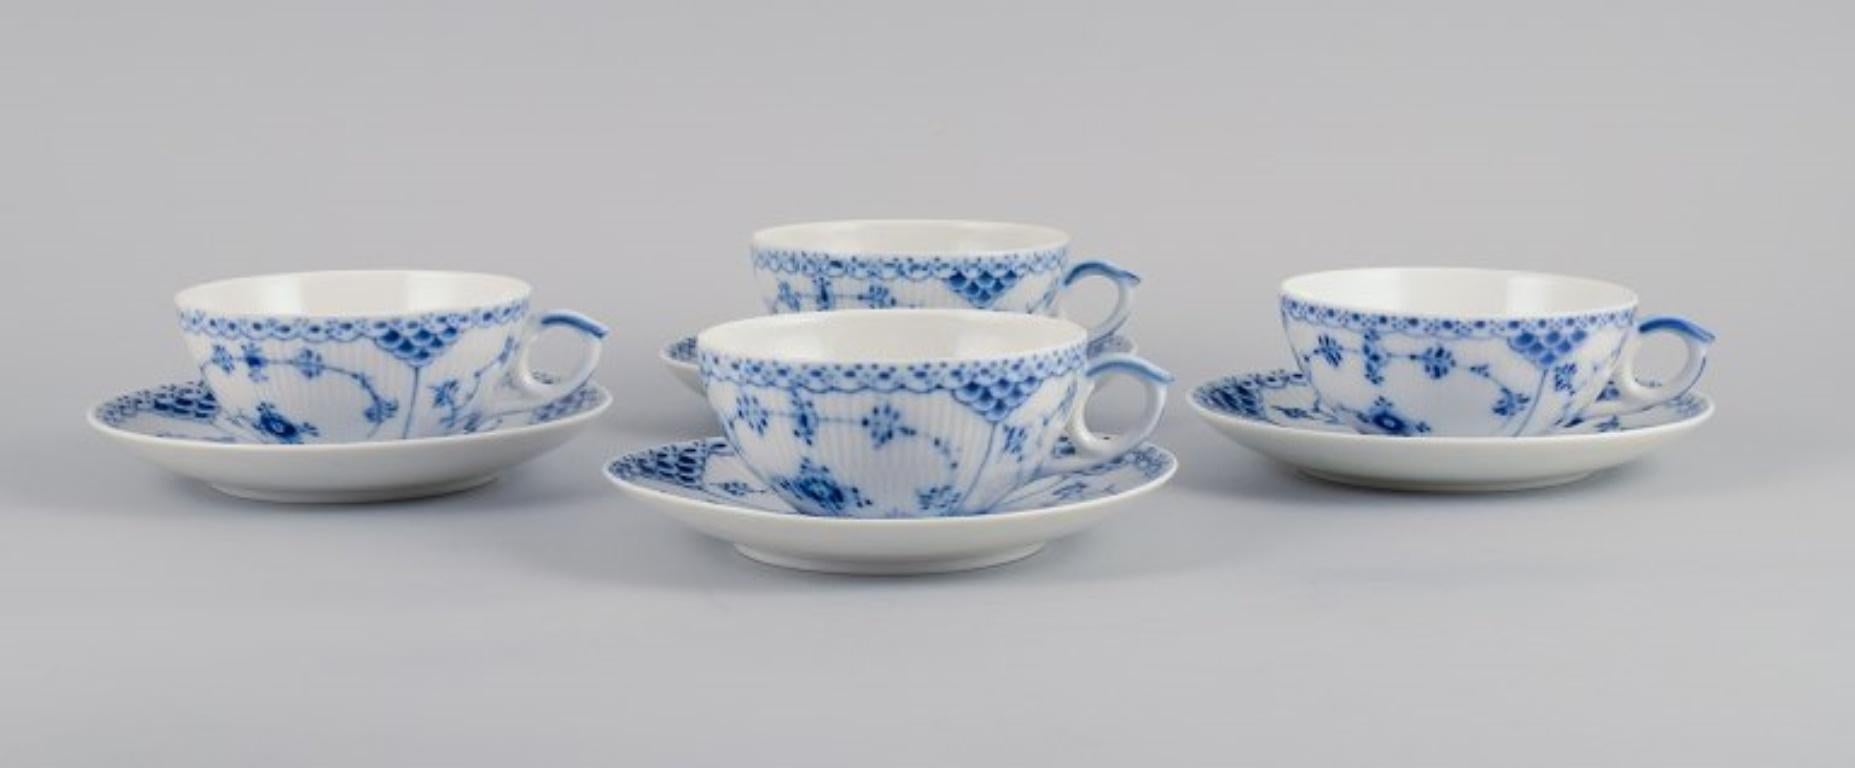 Royal Copenhagen, Blue Fluted half lace, four pairs of teacups.
Model 1/525.
Second and third factory quality.
Marked.
In perfect condition.
Cup: D 9.8 x H 5.0 cm.
Saucer: 14.5 cm.